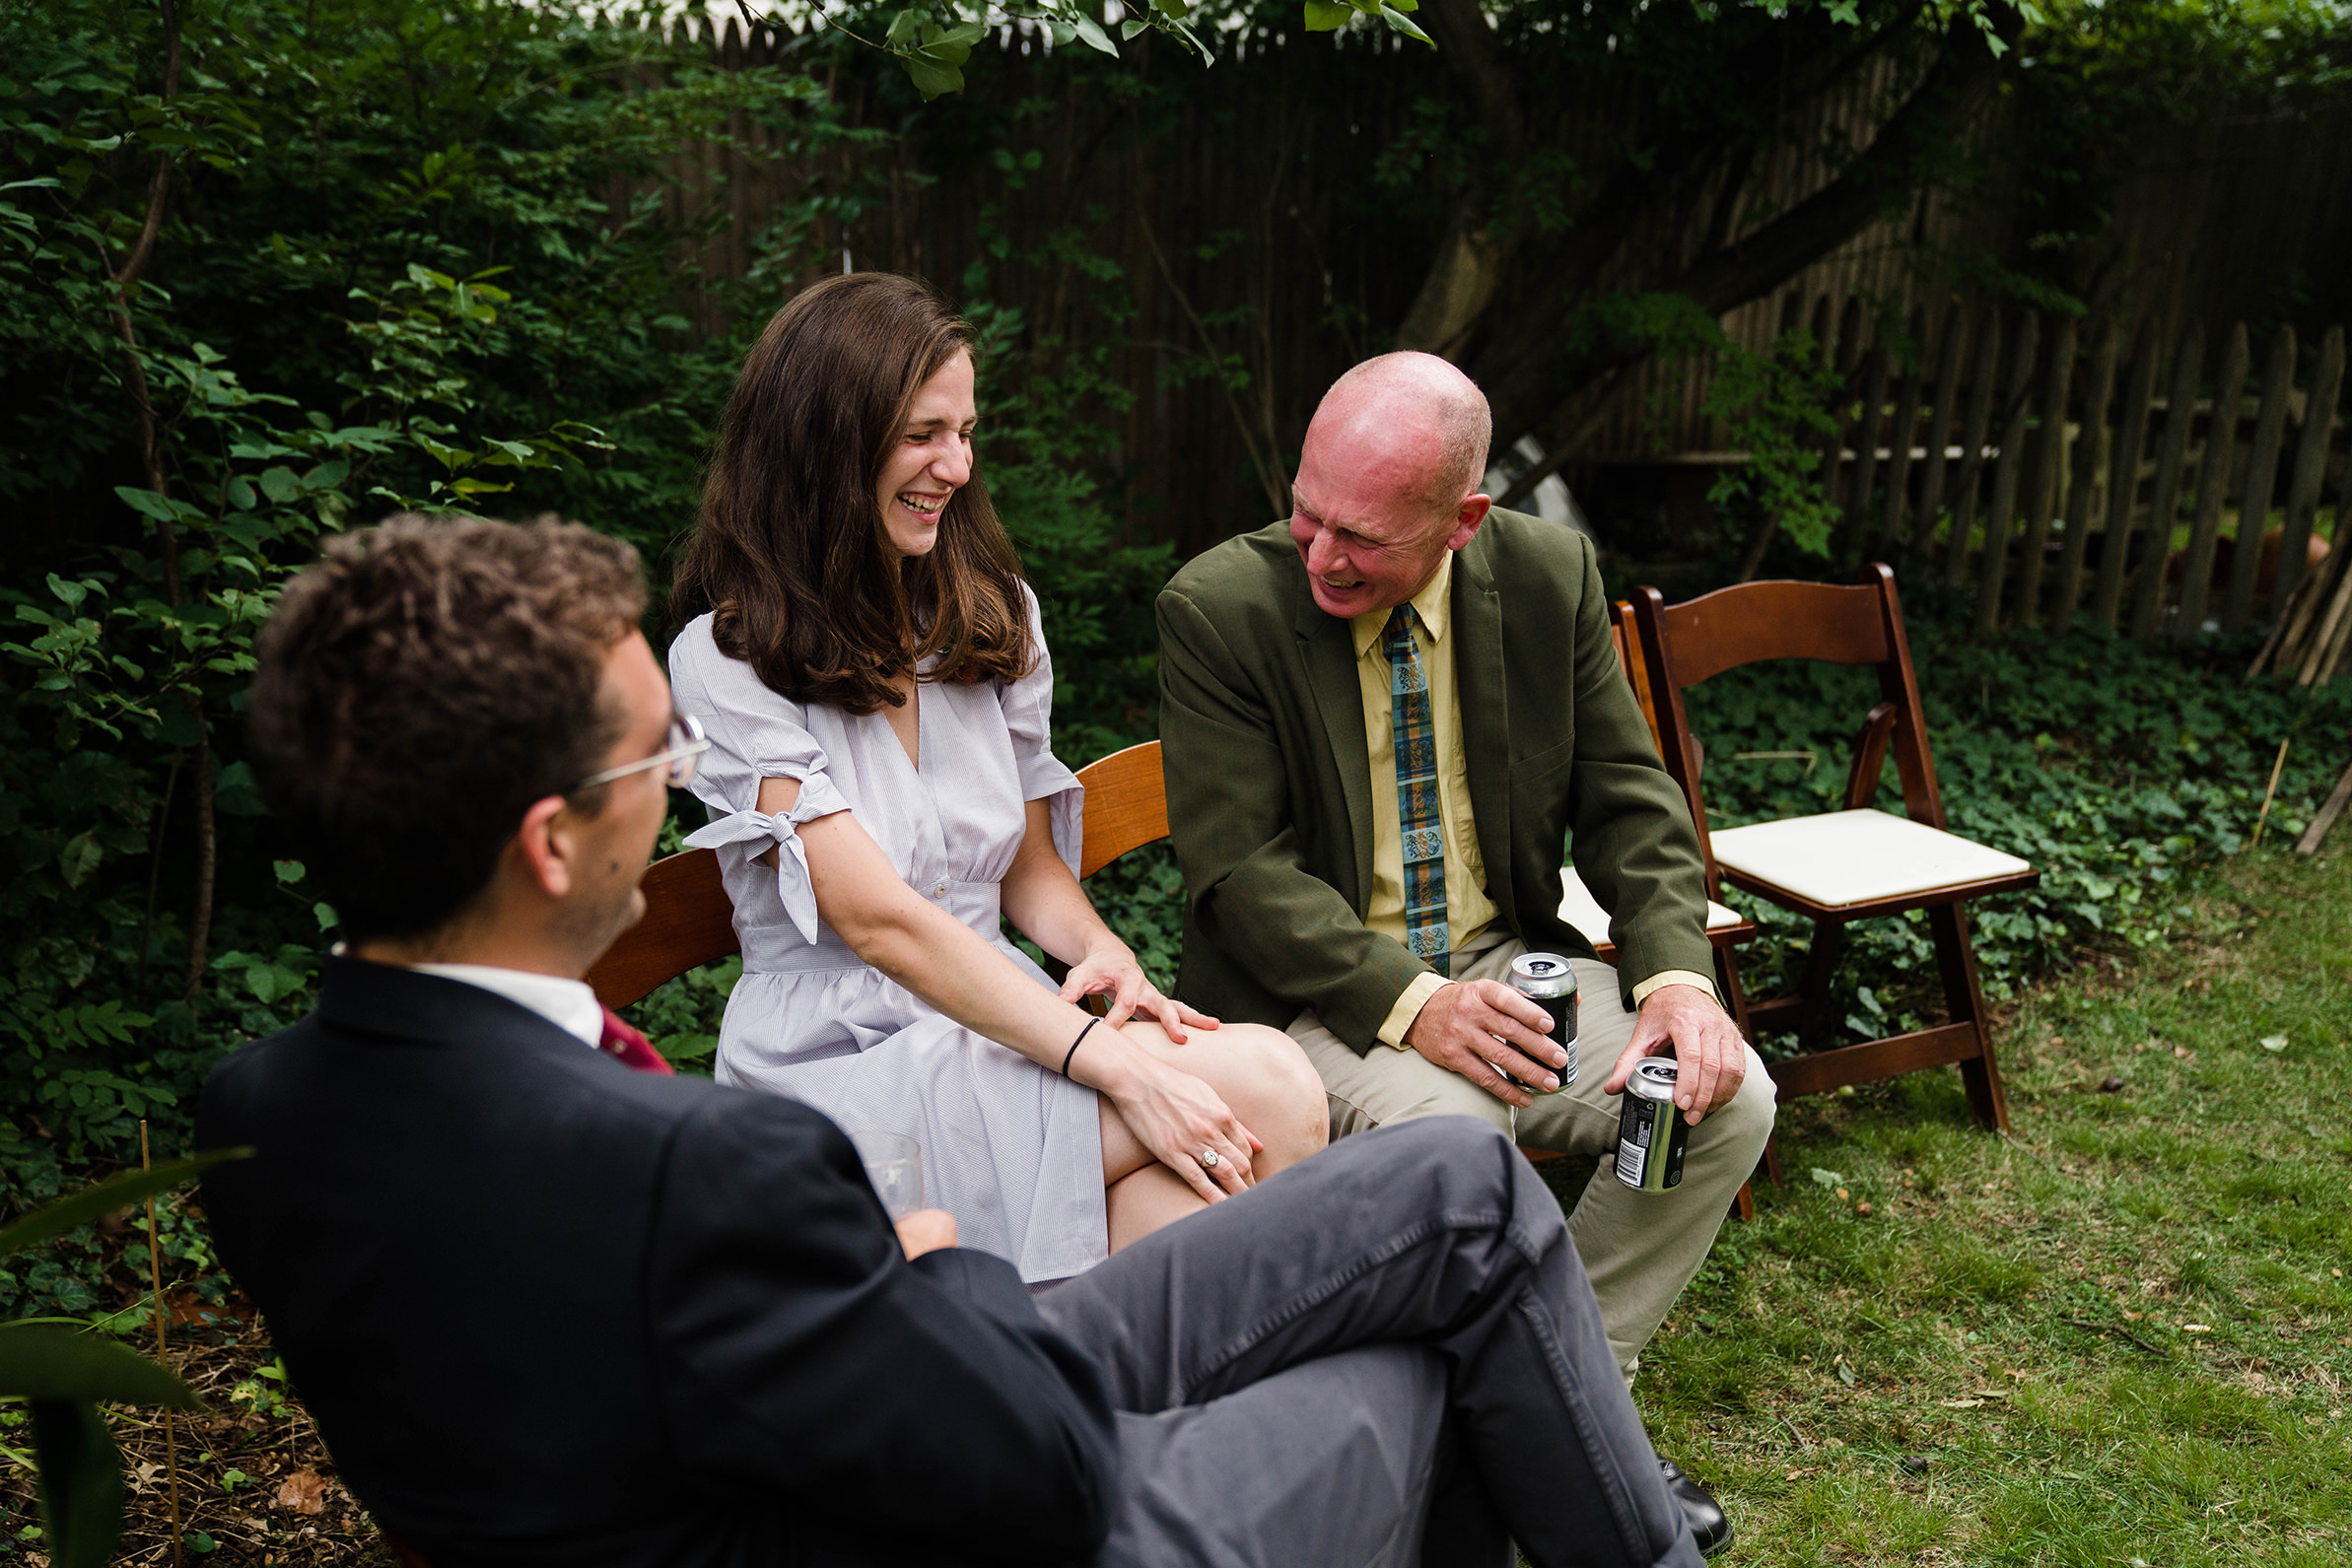 A documentary photograph featured in the best of wedding photography of 2019 showing wedding guests laughing during a backyard wedding reception